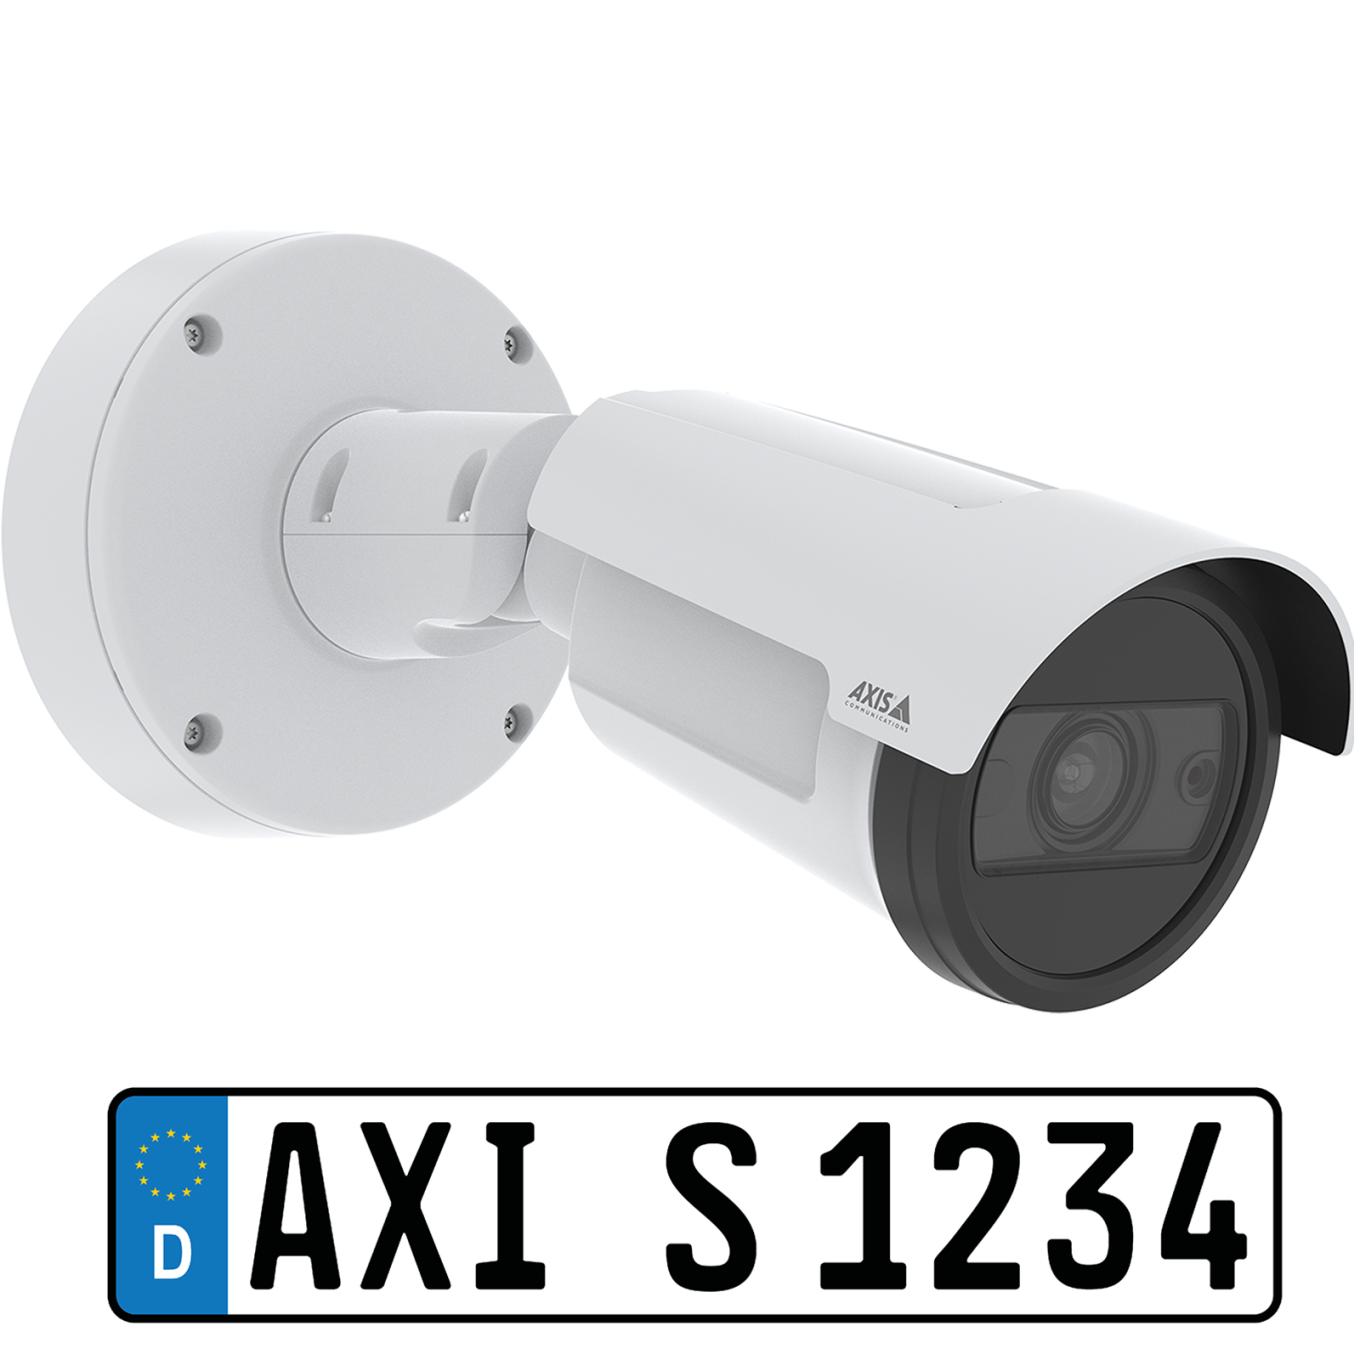 AXIS P1465-LE-3 License Plate Verifier Kit, viewed from its right angle